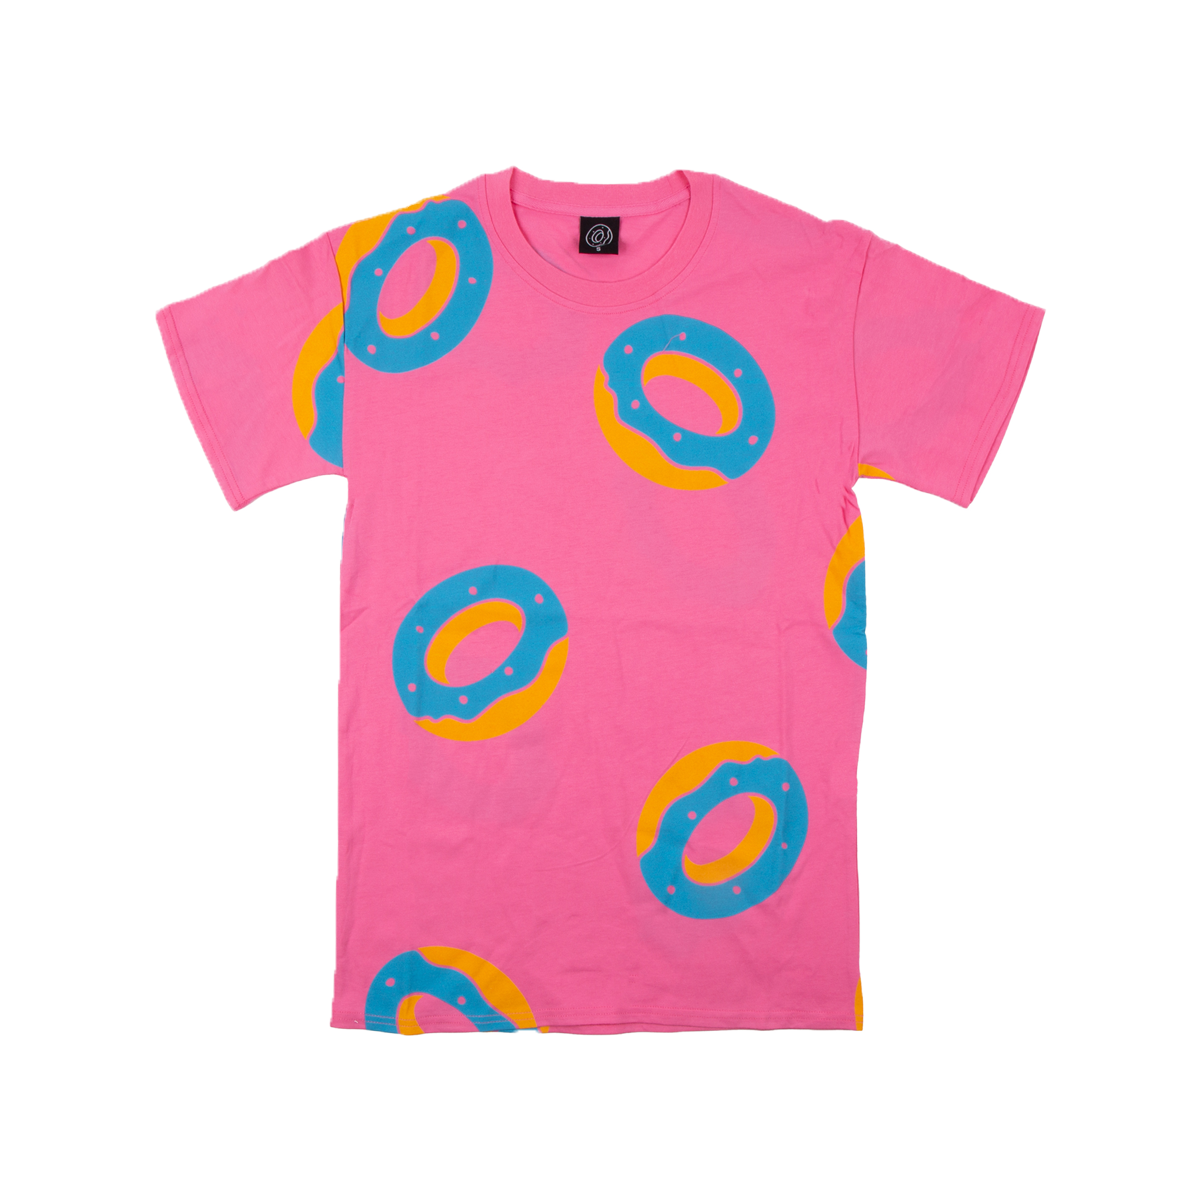 OF Donut Allover Print Tee Pink